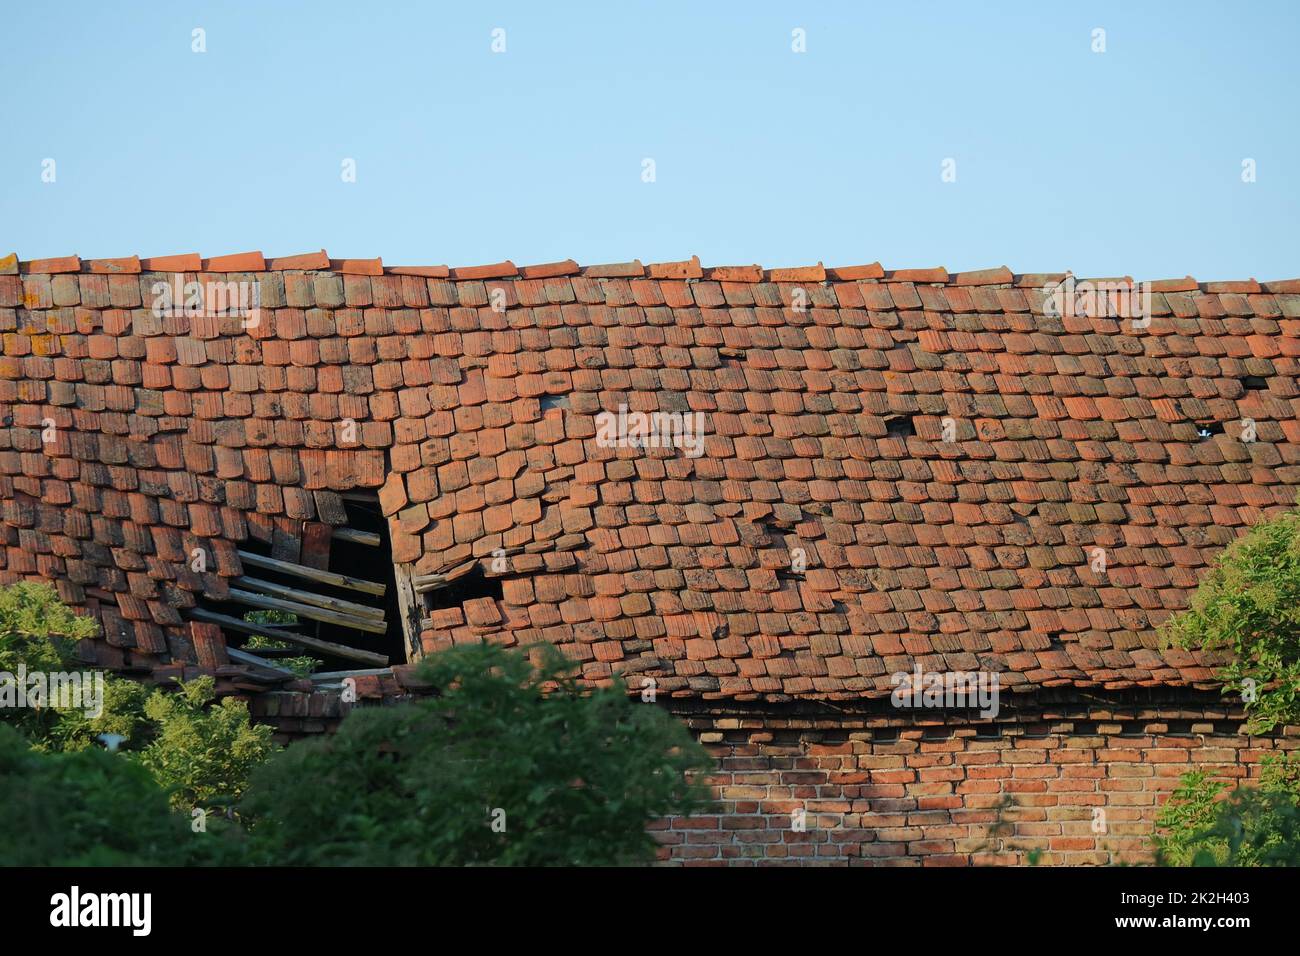 Dilapidated tiled roof of a barn Stock Photo